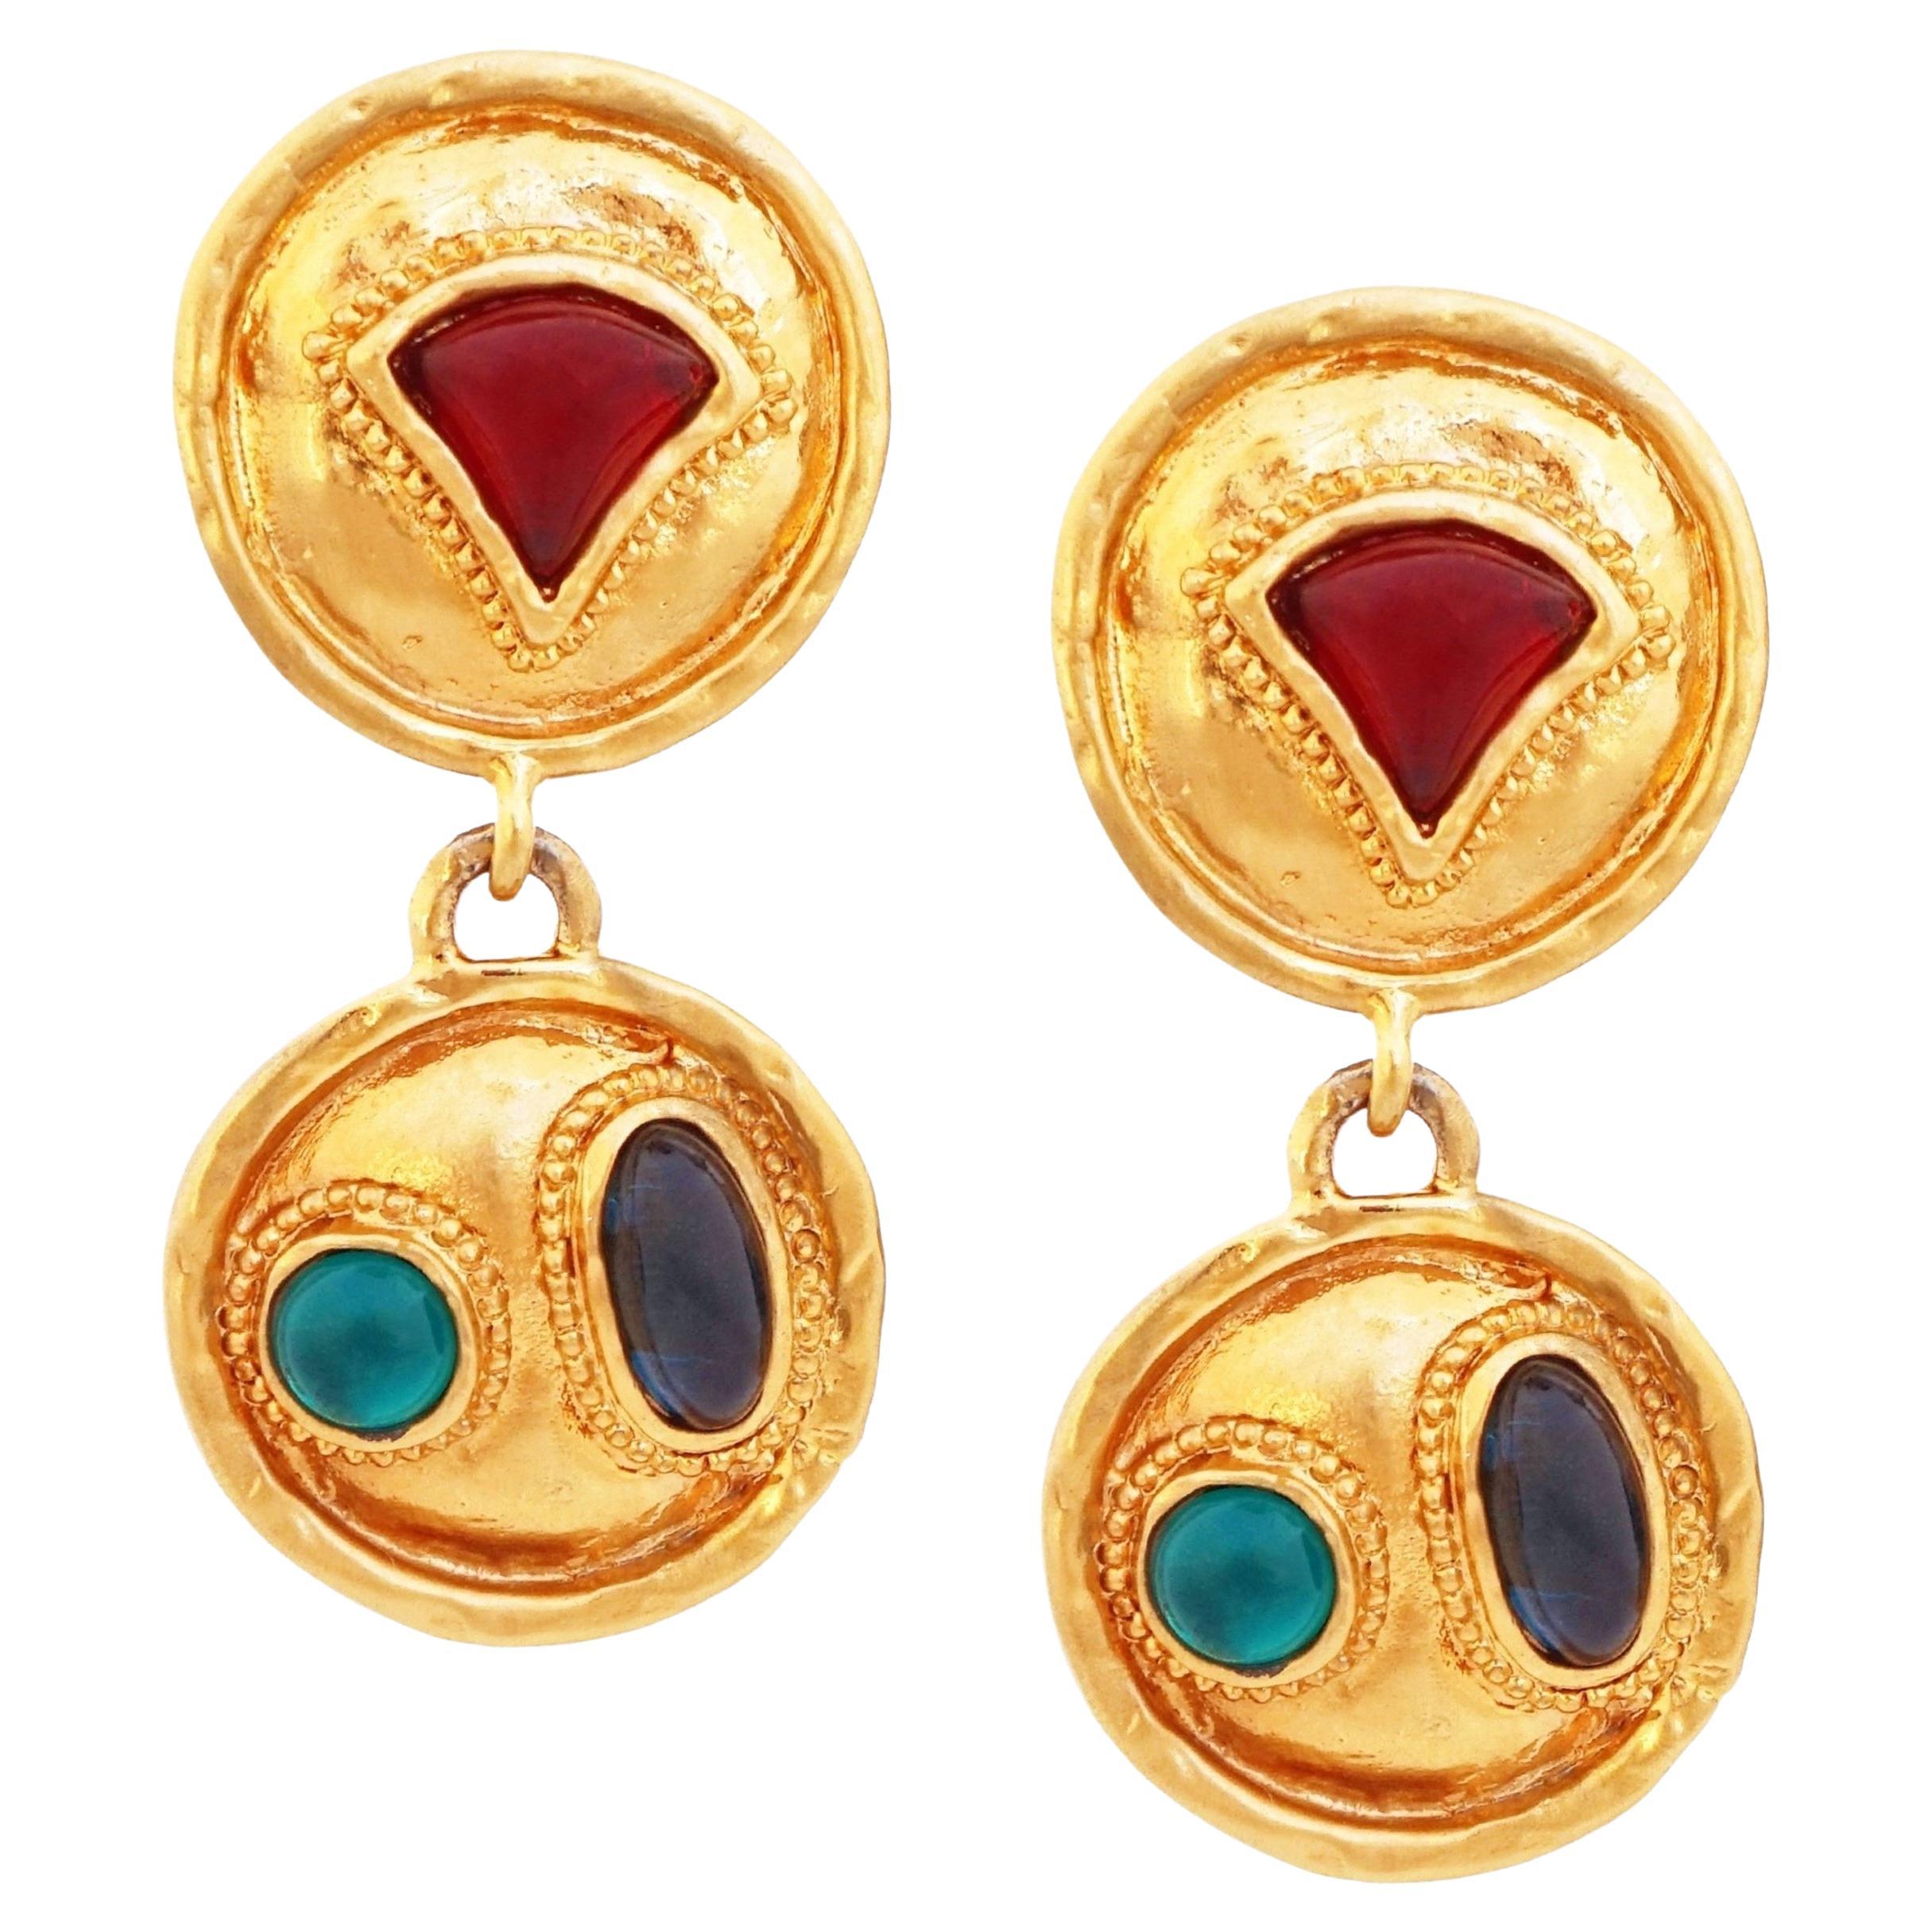 Gilded Drop Statement Earrings With Colorful Gripoix Glass By Les Bernard, 1980s For Sale